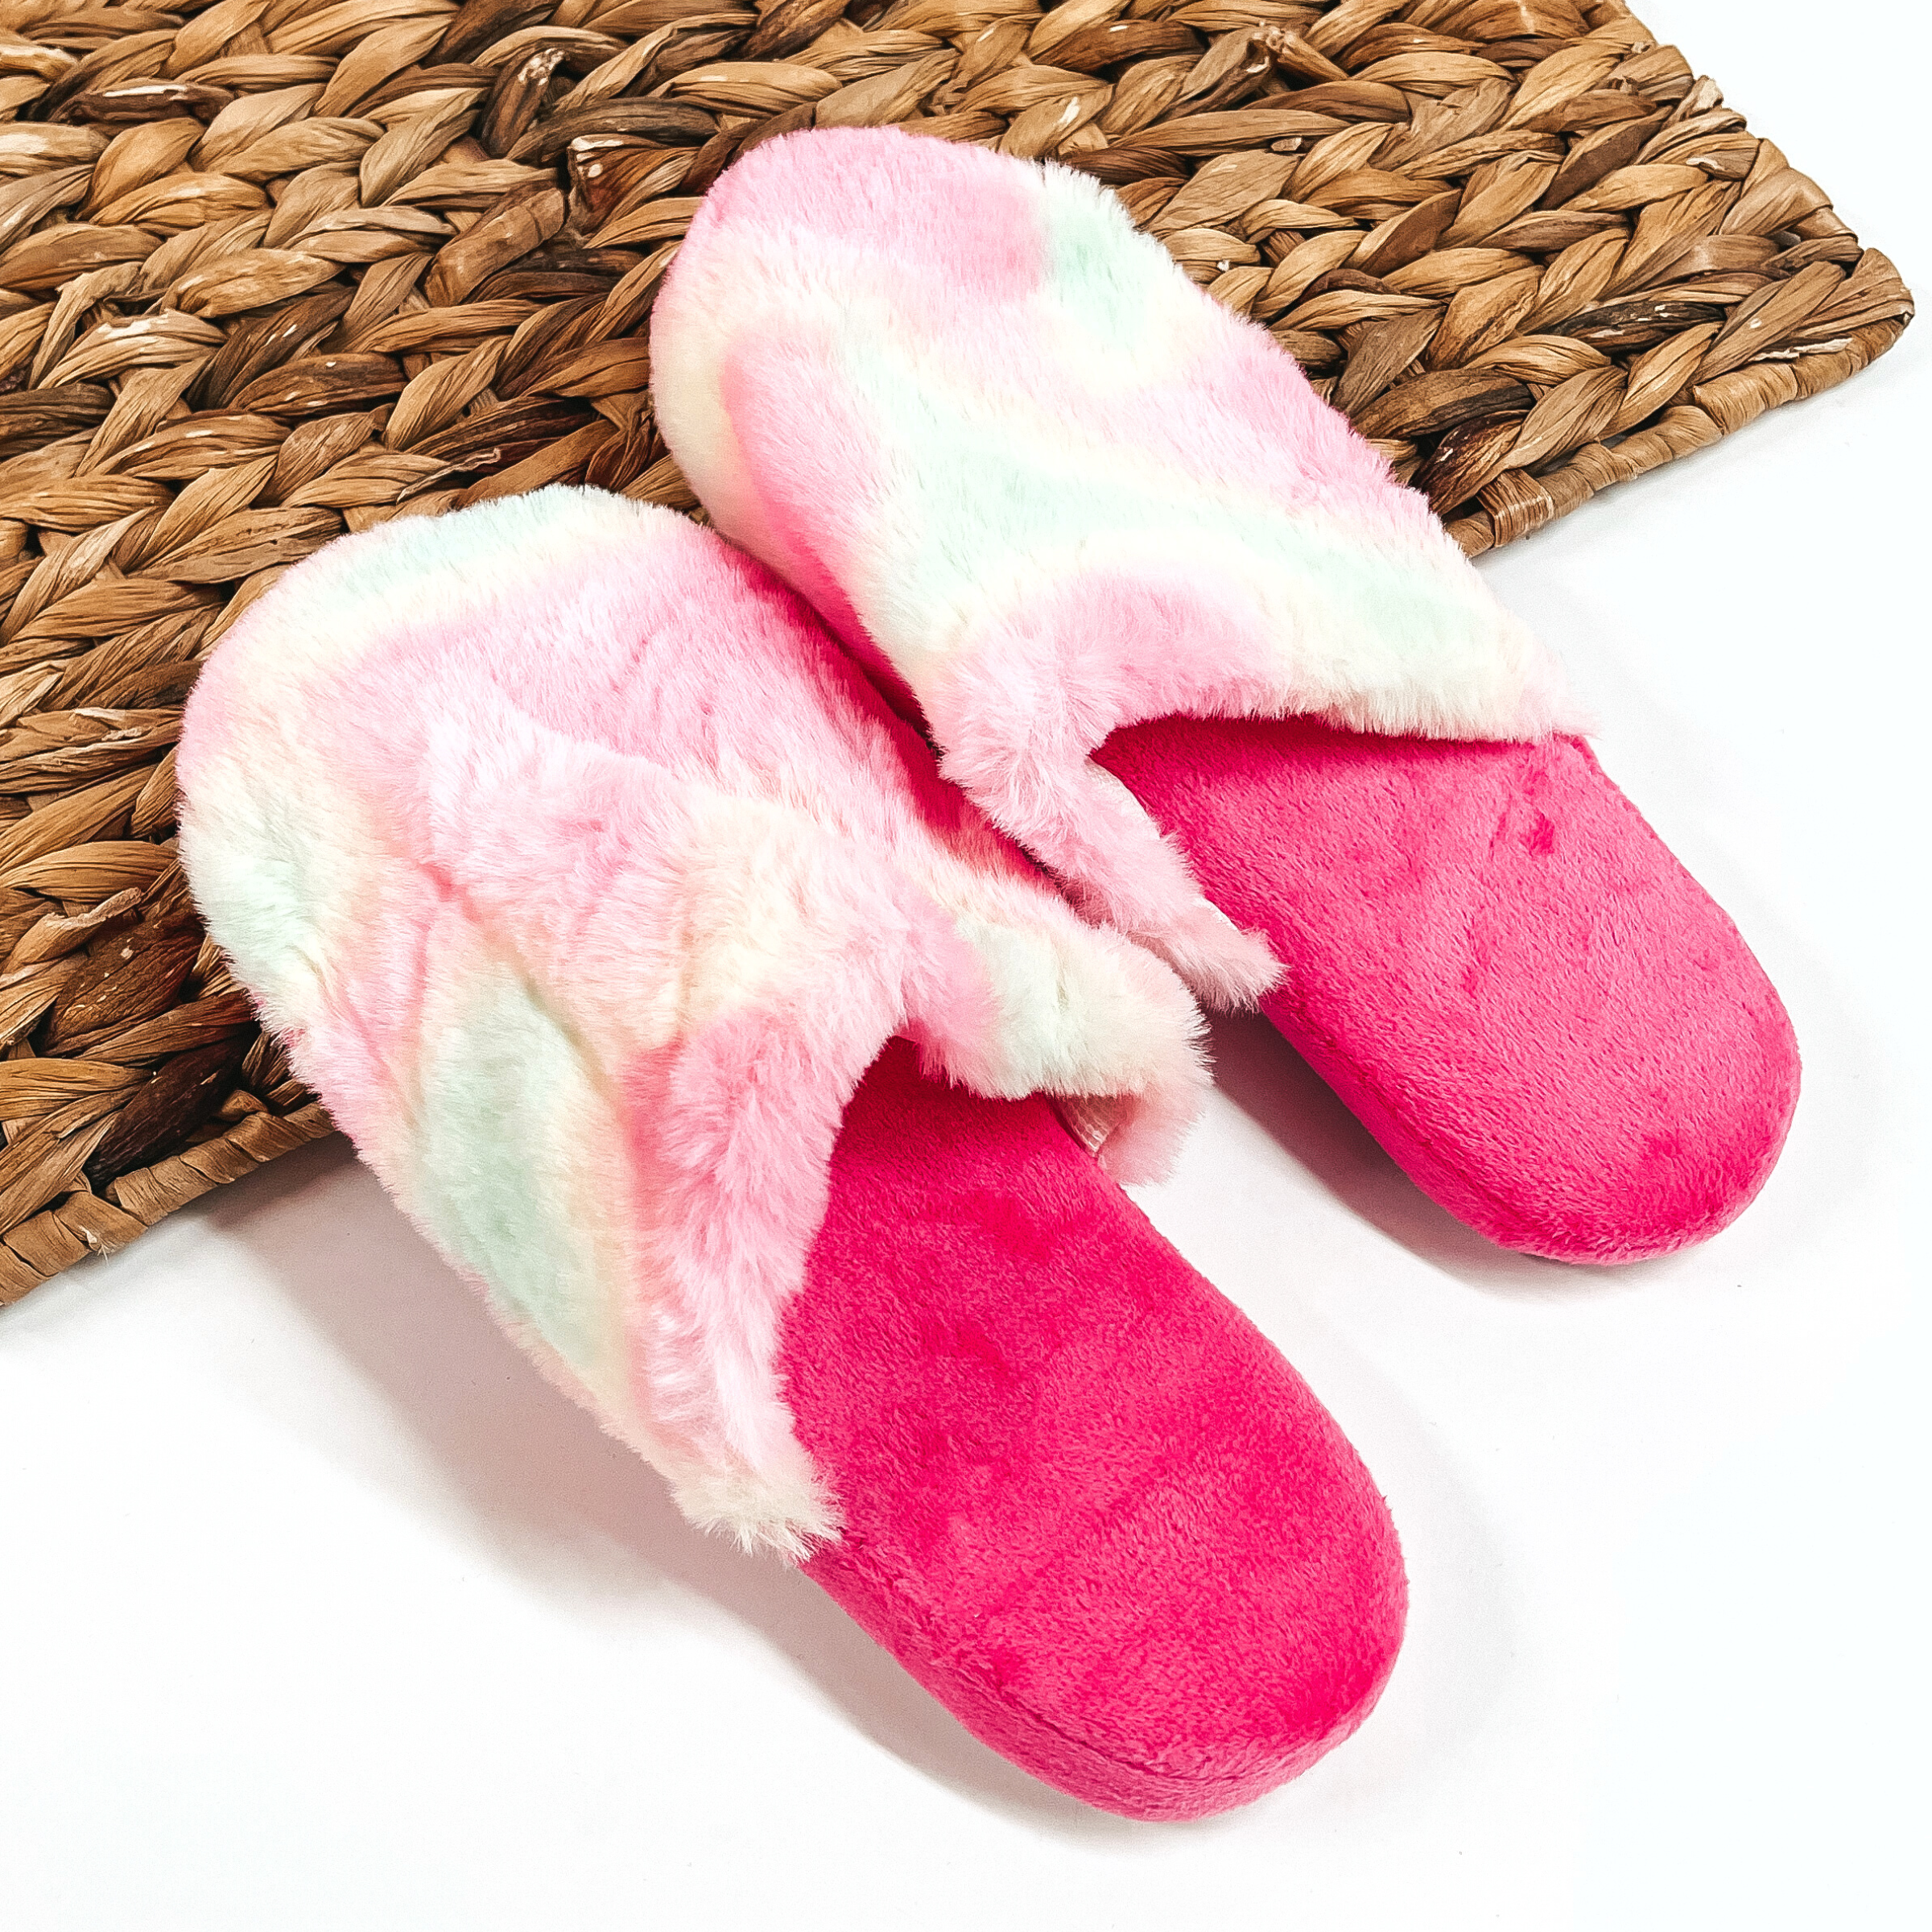 There are a pair of fluffy slip on slippers, the sole is hot pink and the top  part is tie dye with a pink/yellow/green mix. These slippers are placed on a  white background and a brown woven slate.